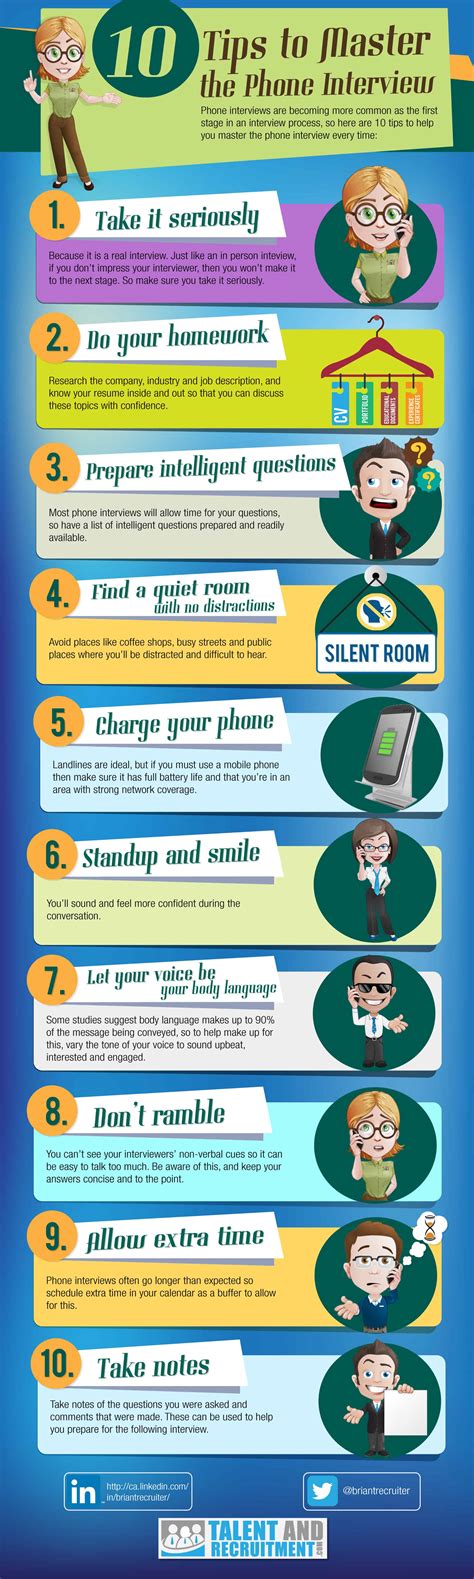 10-tips-to-master-the-phone-interview-infographic-daily-infographic